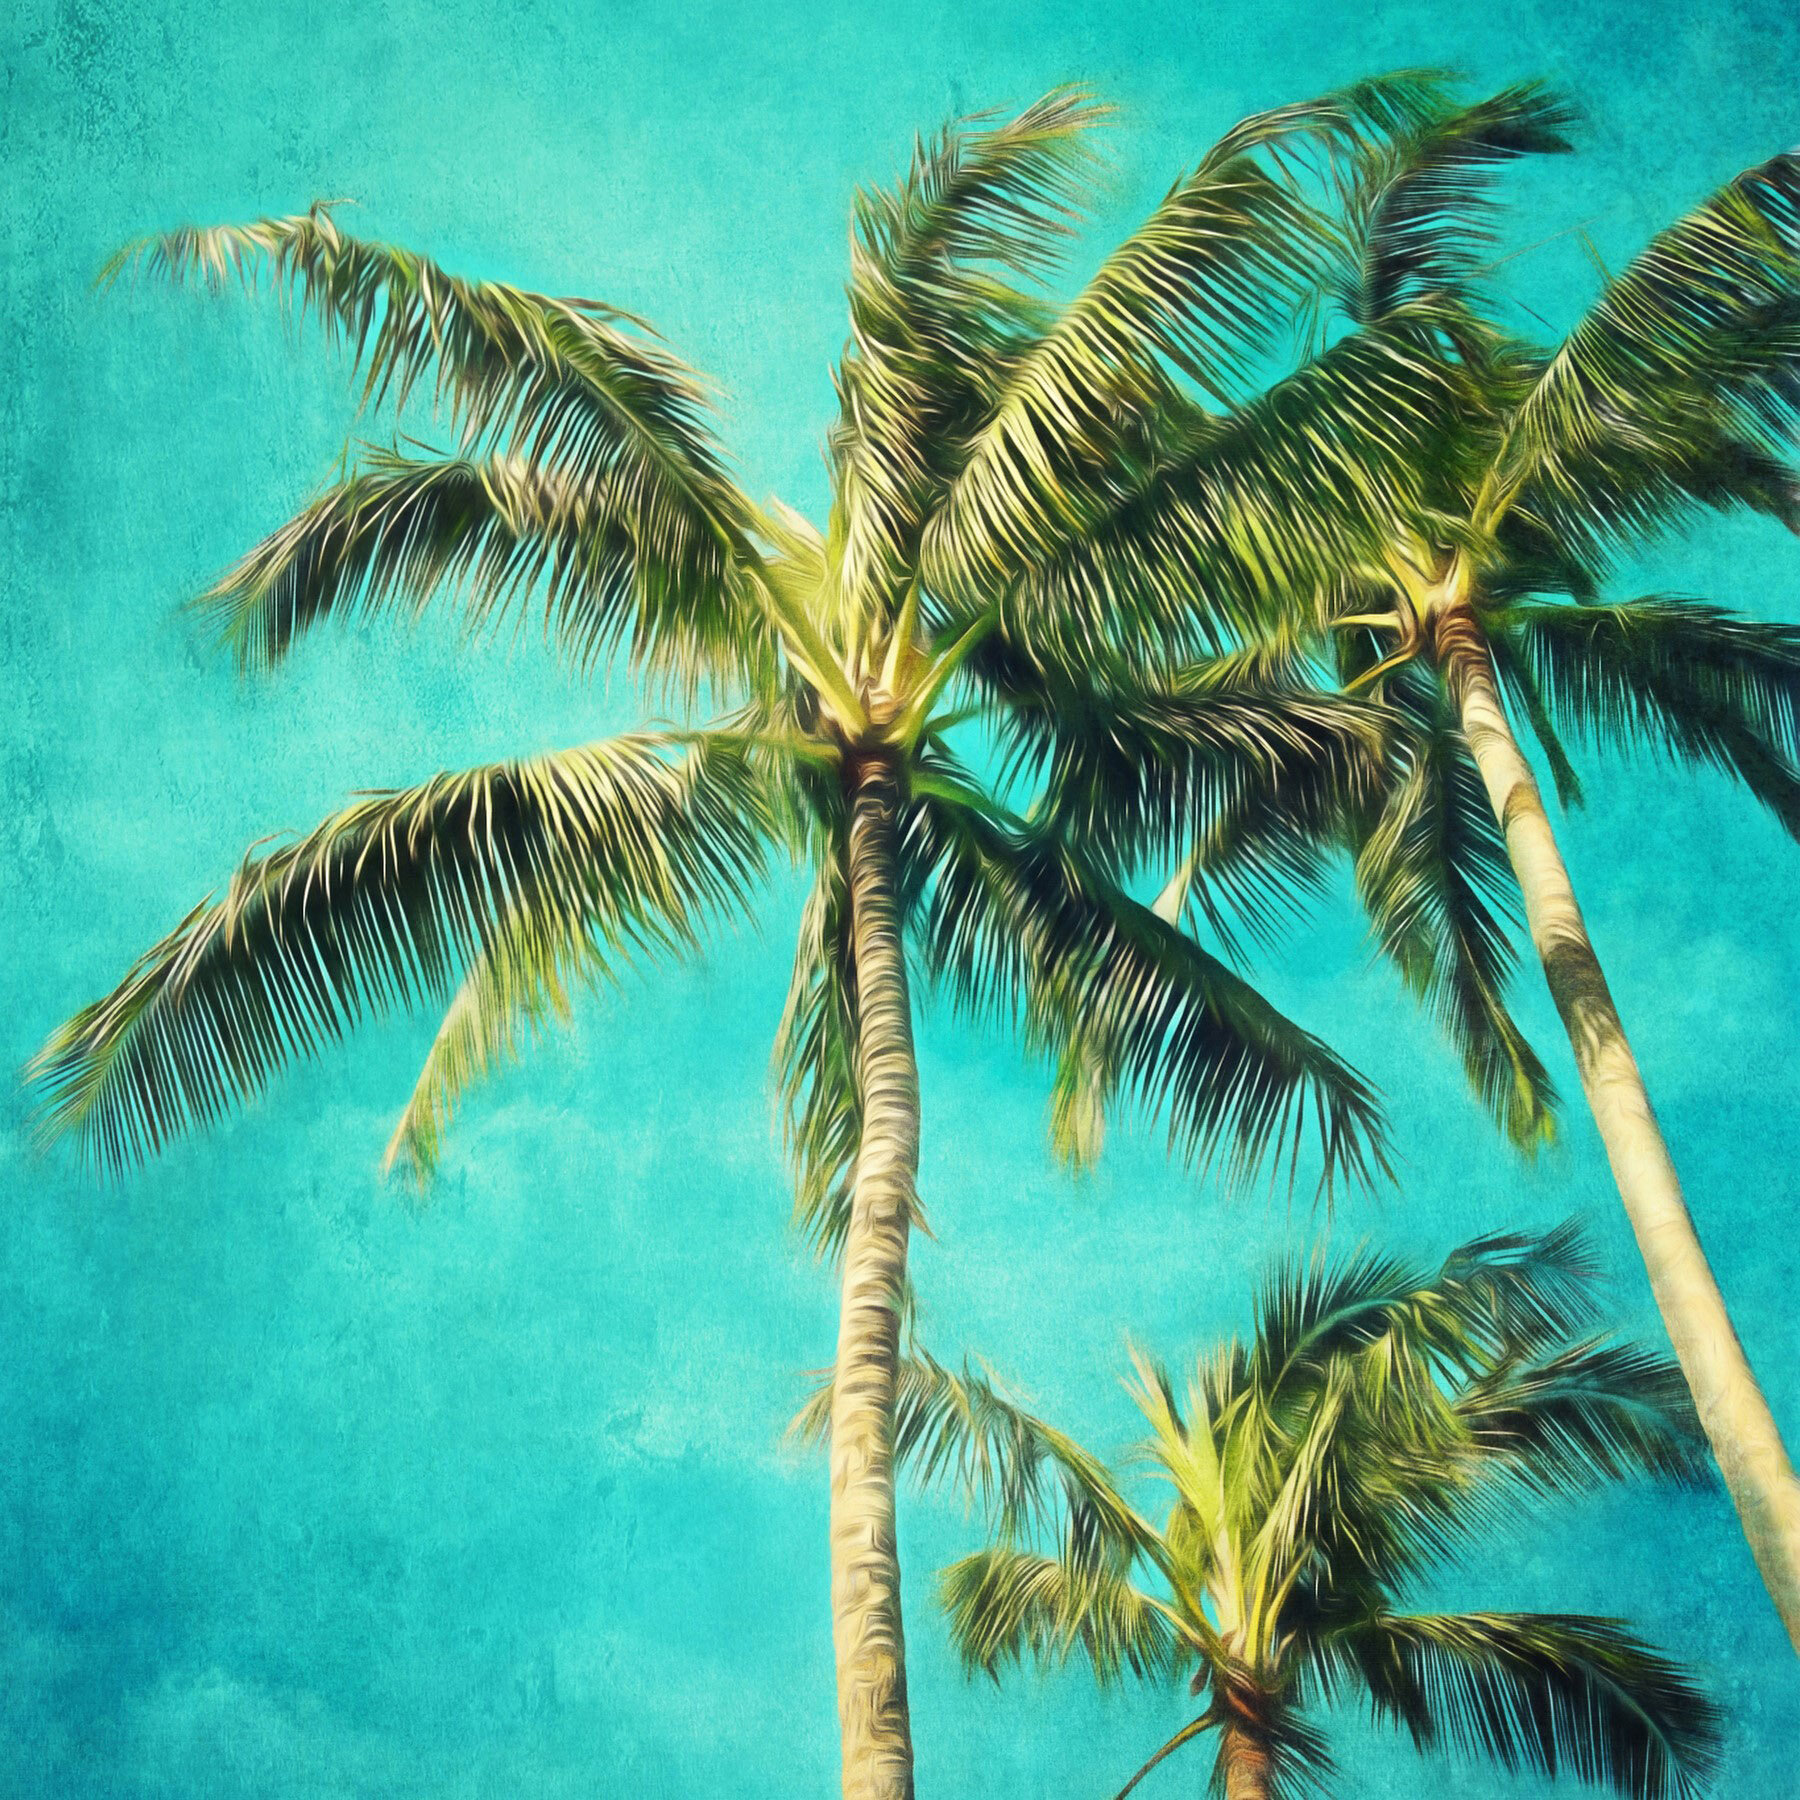 Picture on Canvas Gallery Wraps Palm Tree Photography